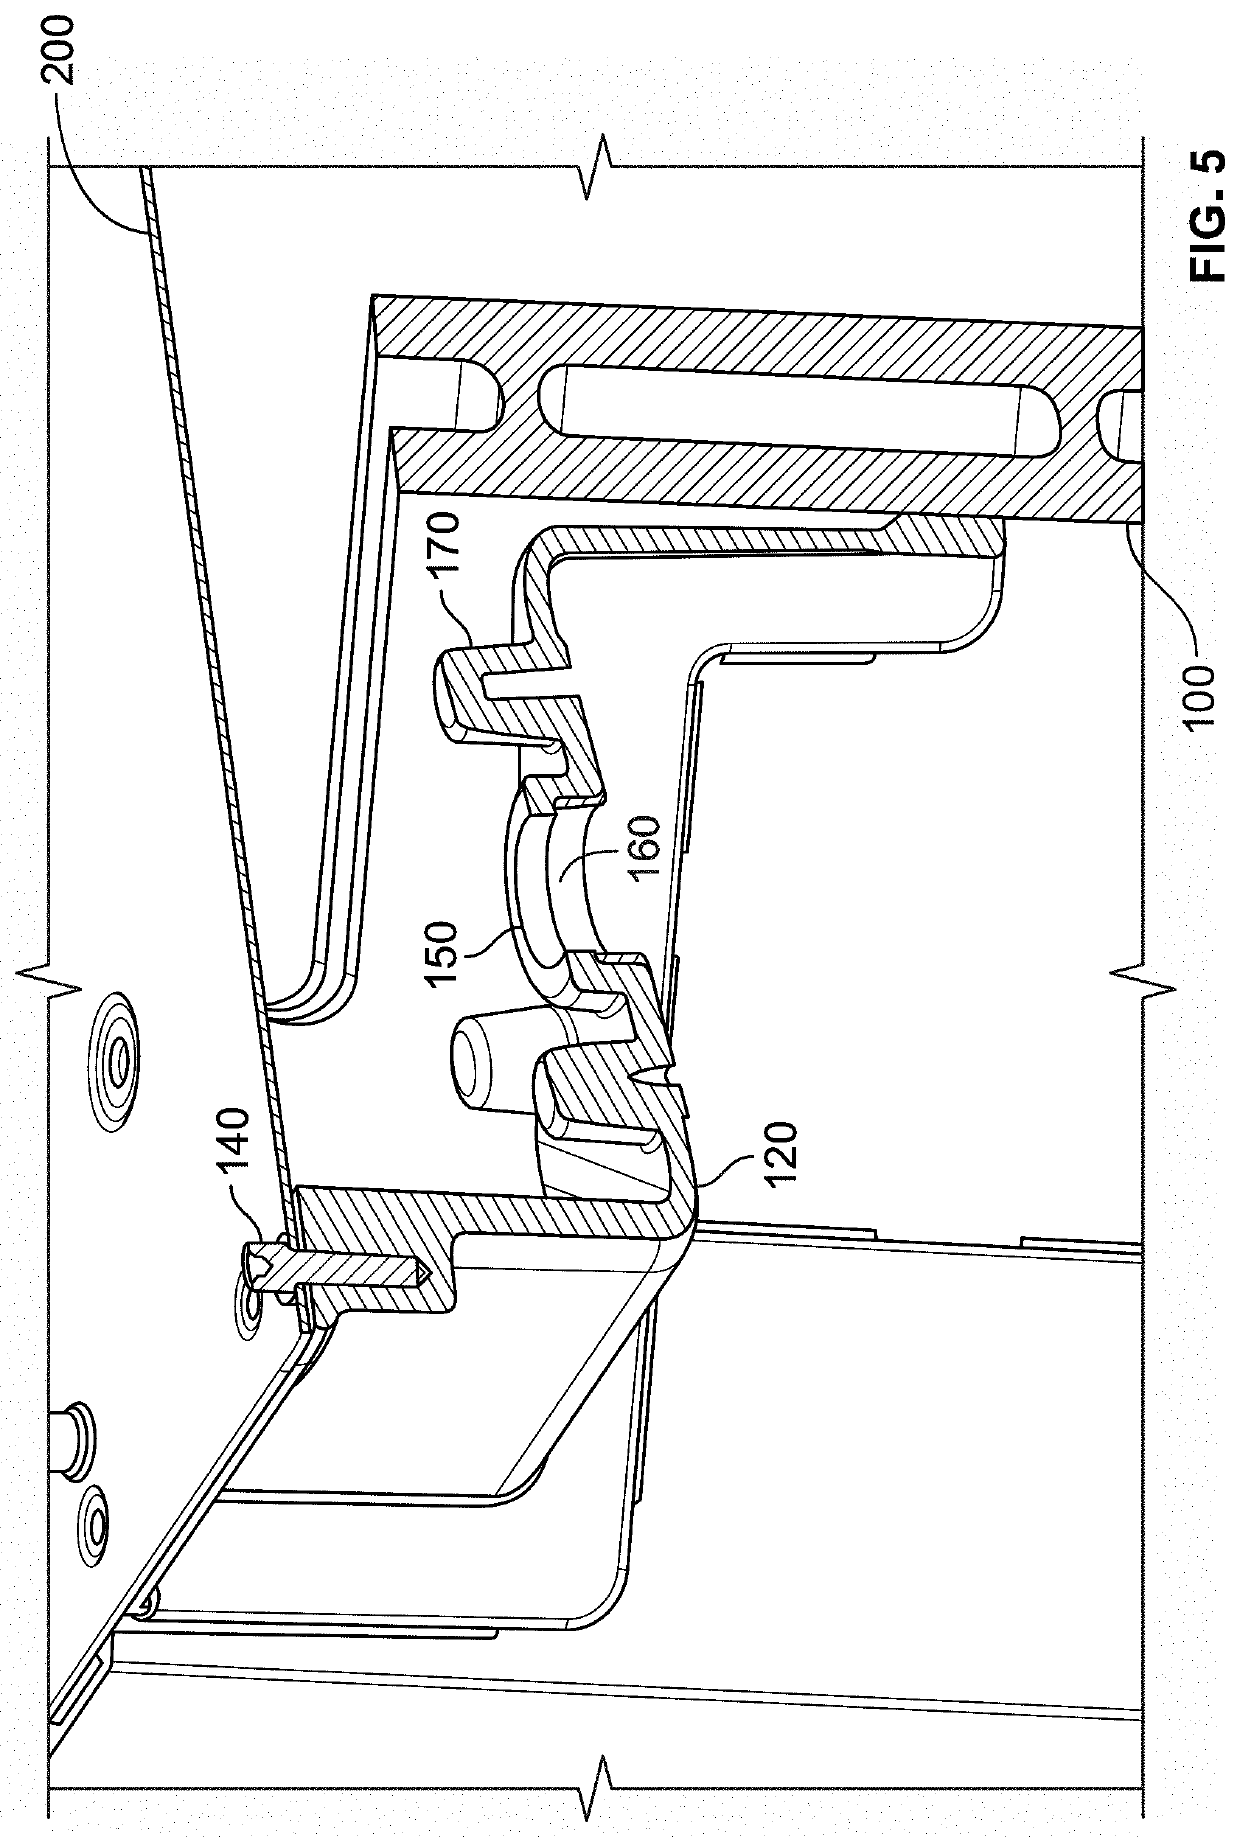 Electric vehicle battery pack having external side pouch for electrical components